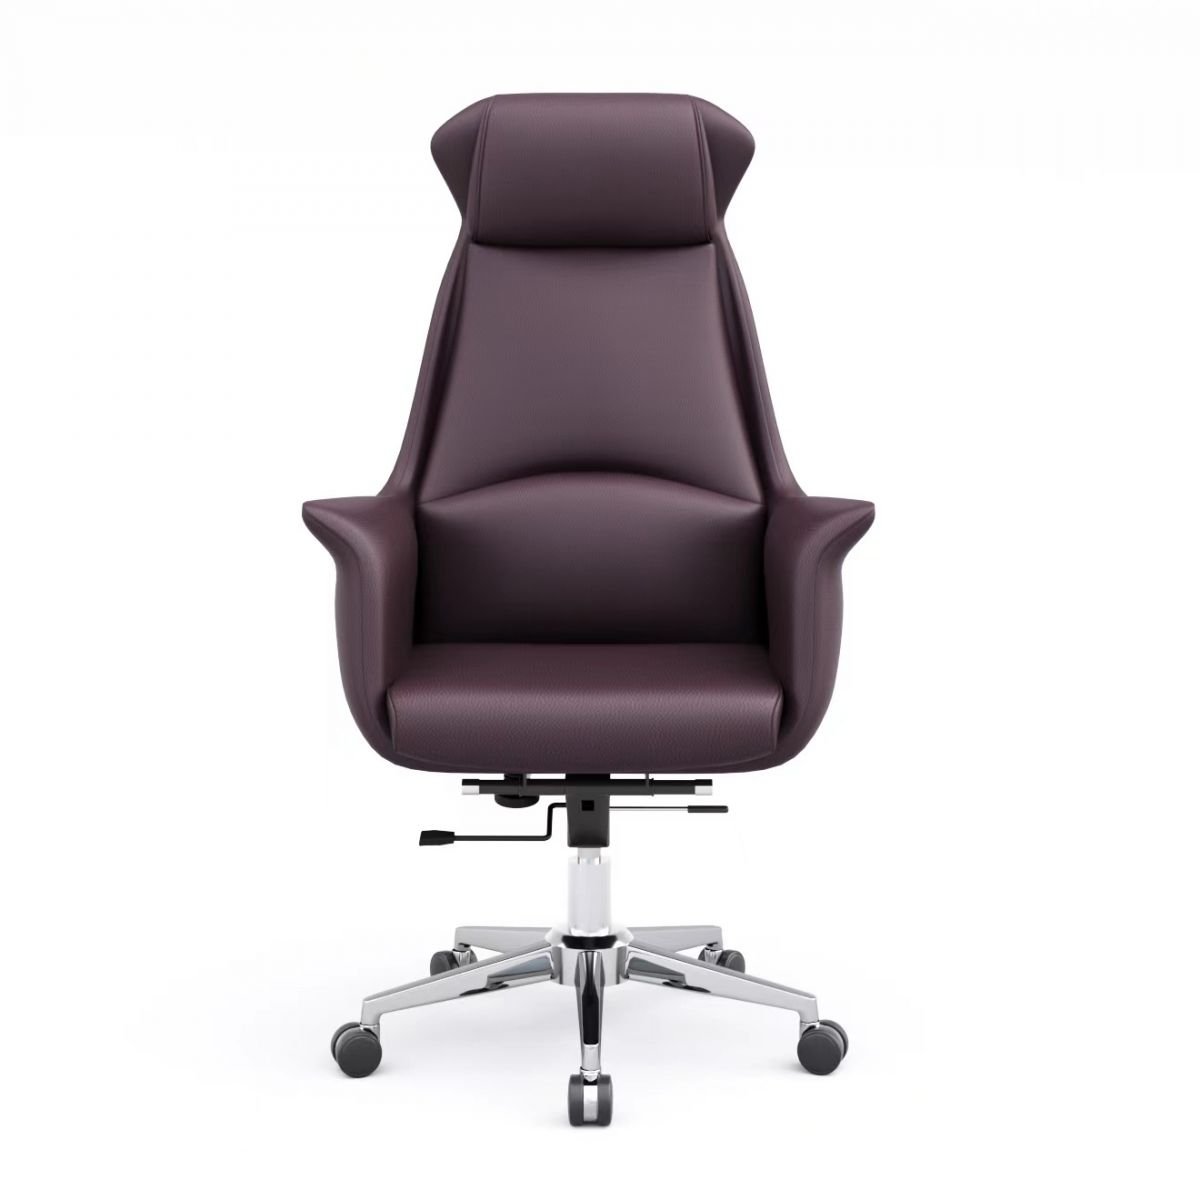 Ergonomic Sepia Rawhide Office Furniture with Tilt Available, Headrest, Swivel Wheels, and Armrest, Grey/ Coffee, Microfiber Leather